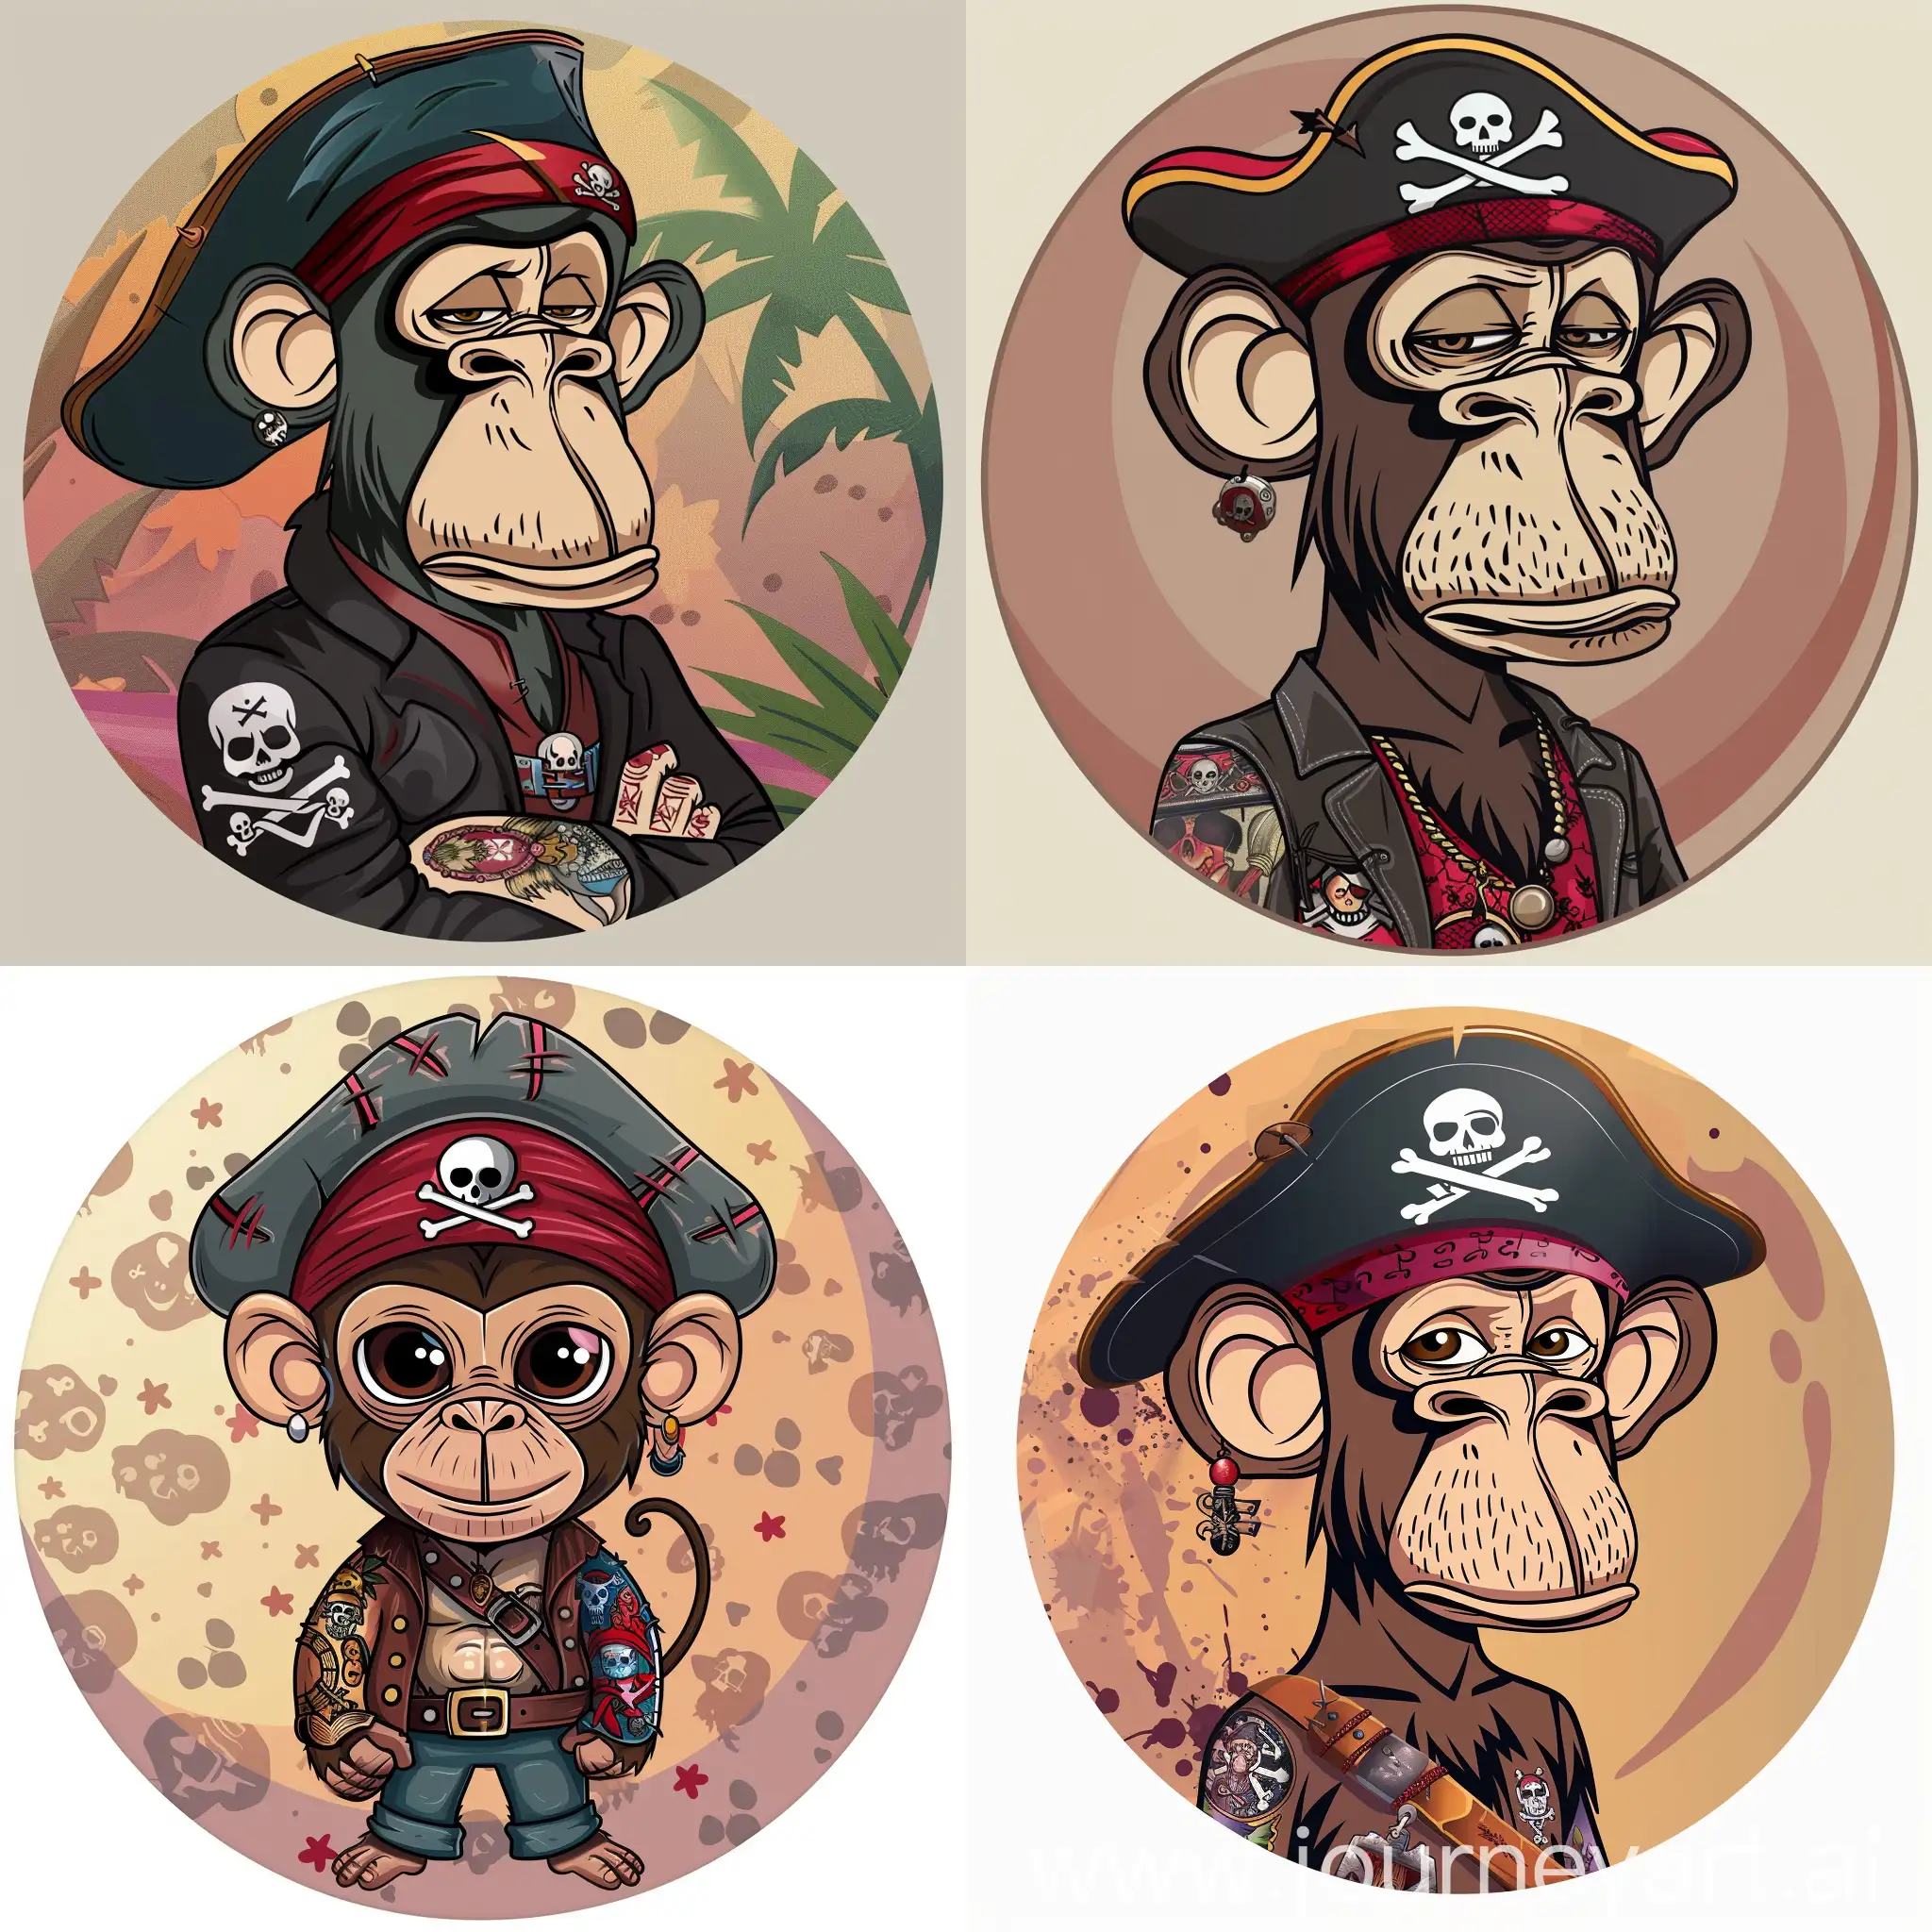 Cartoon of a pirate monkey with pirate style tatoos

With a round background 

For a tee-shirt design 

